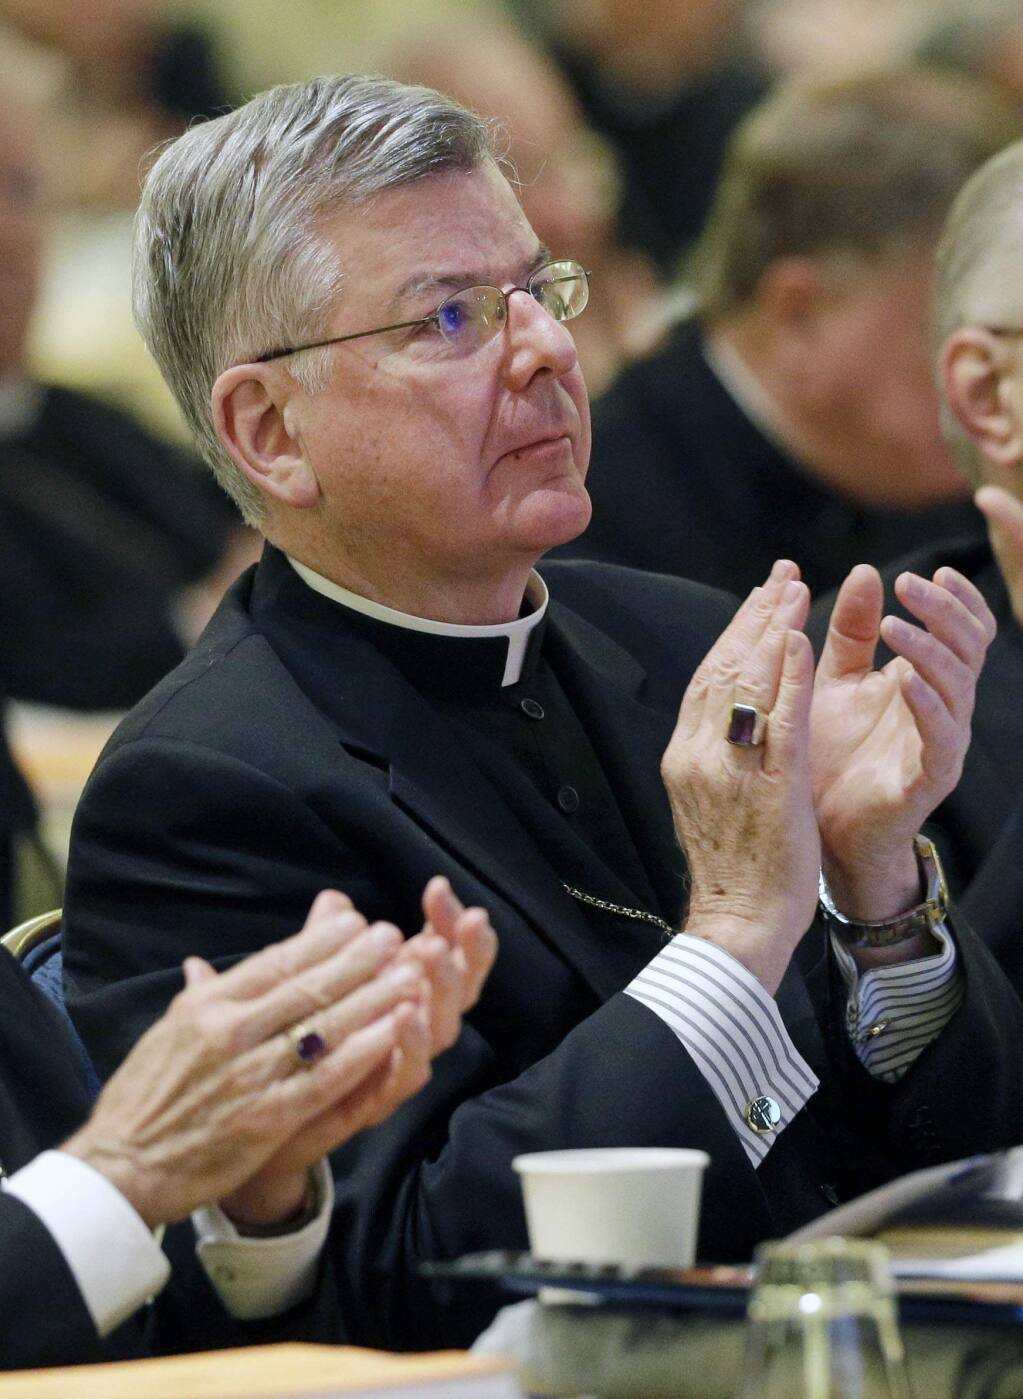 FILE - In this Nov. 12, 2013 file photo, Archbishop John Nienstedt, of St. Paul and Minneapolis, applauds after a presentation at the United States Conference of Catholic Bishops' annual fall meeting in Baltimore. Jennifer Haselberger, the whistleblower who took on the Archdiocese of St. Paul and Minneapolis about allegations of clergy sexual misconduct, said in an affidavit released Tuesday, July 15, 2014, that archbishops and staff ignored the 2002 pledge by Roman Catholic bishops to keep abusive clergy out of parishes. (AP Photo/Patrick Semansky, File)